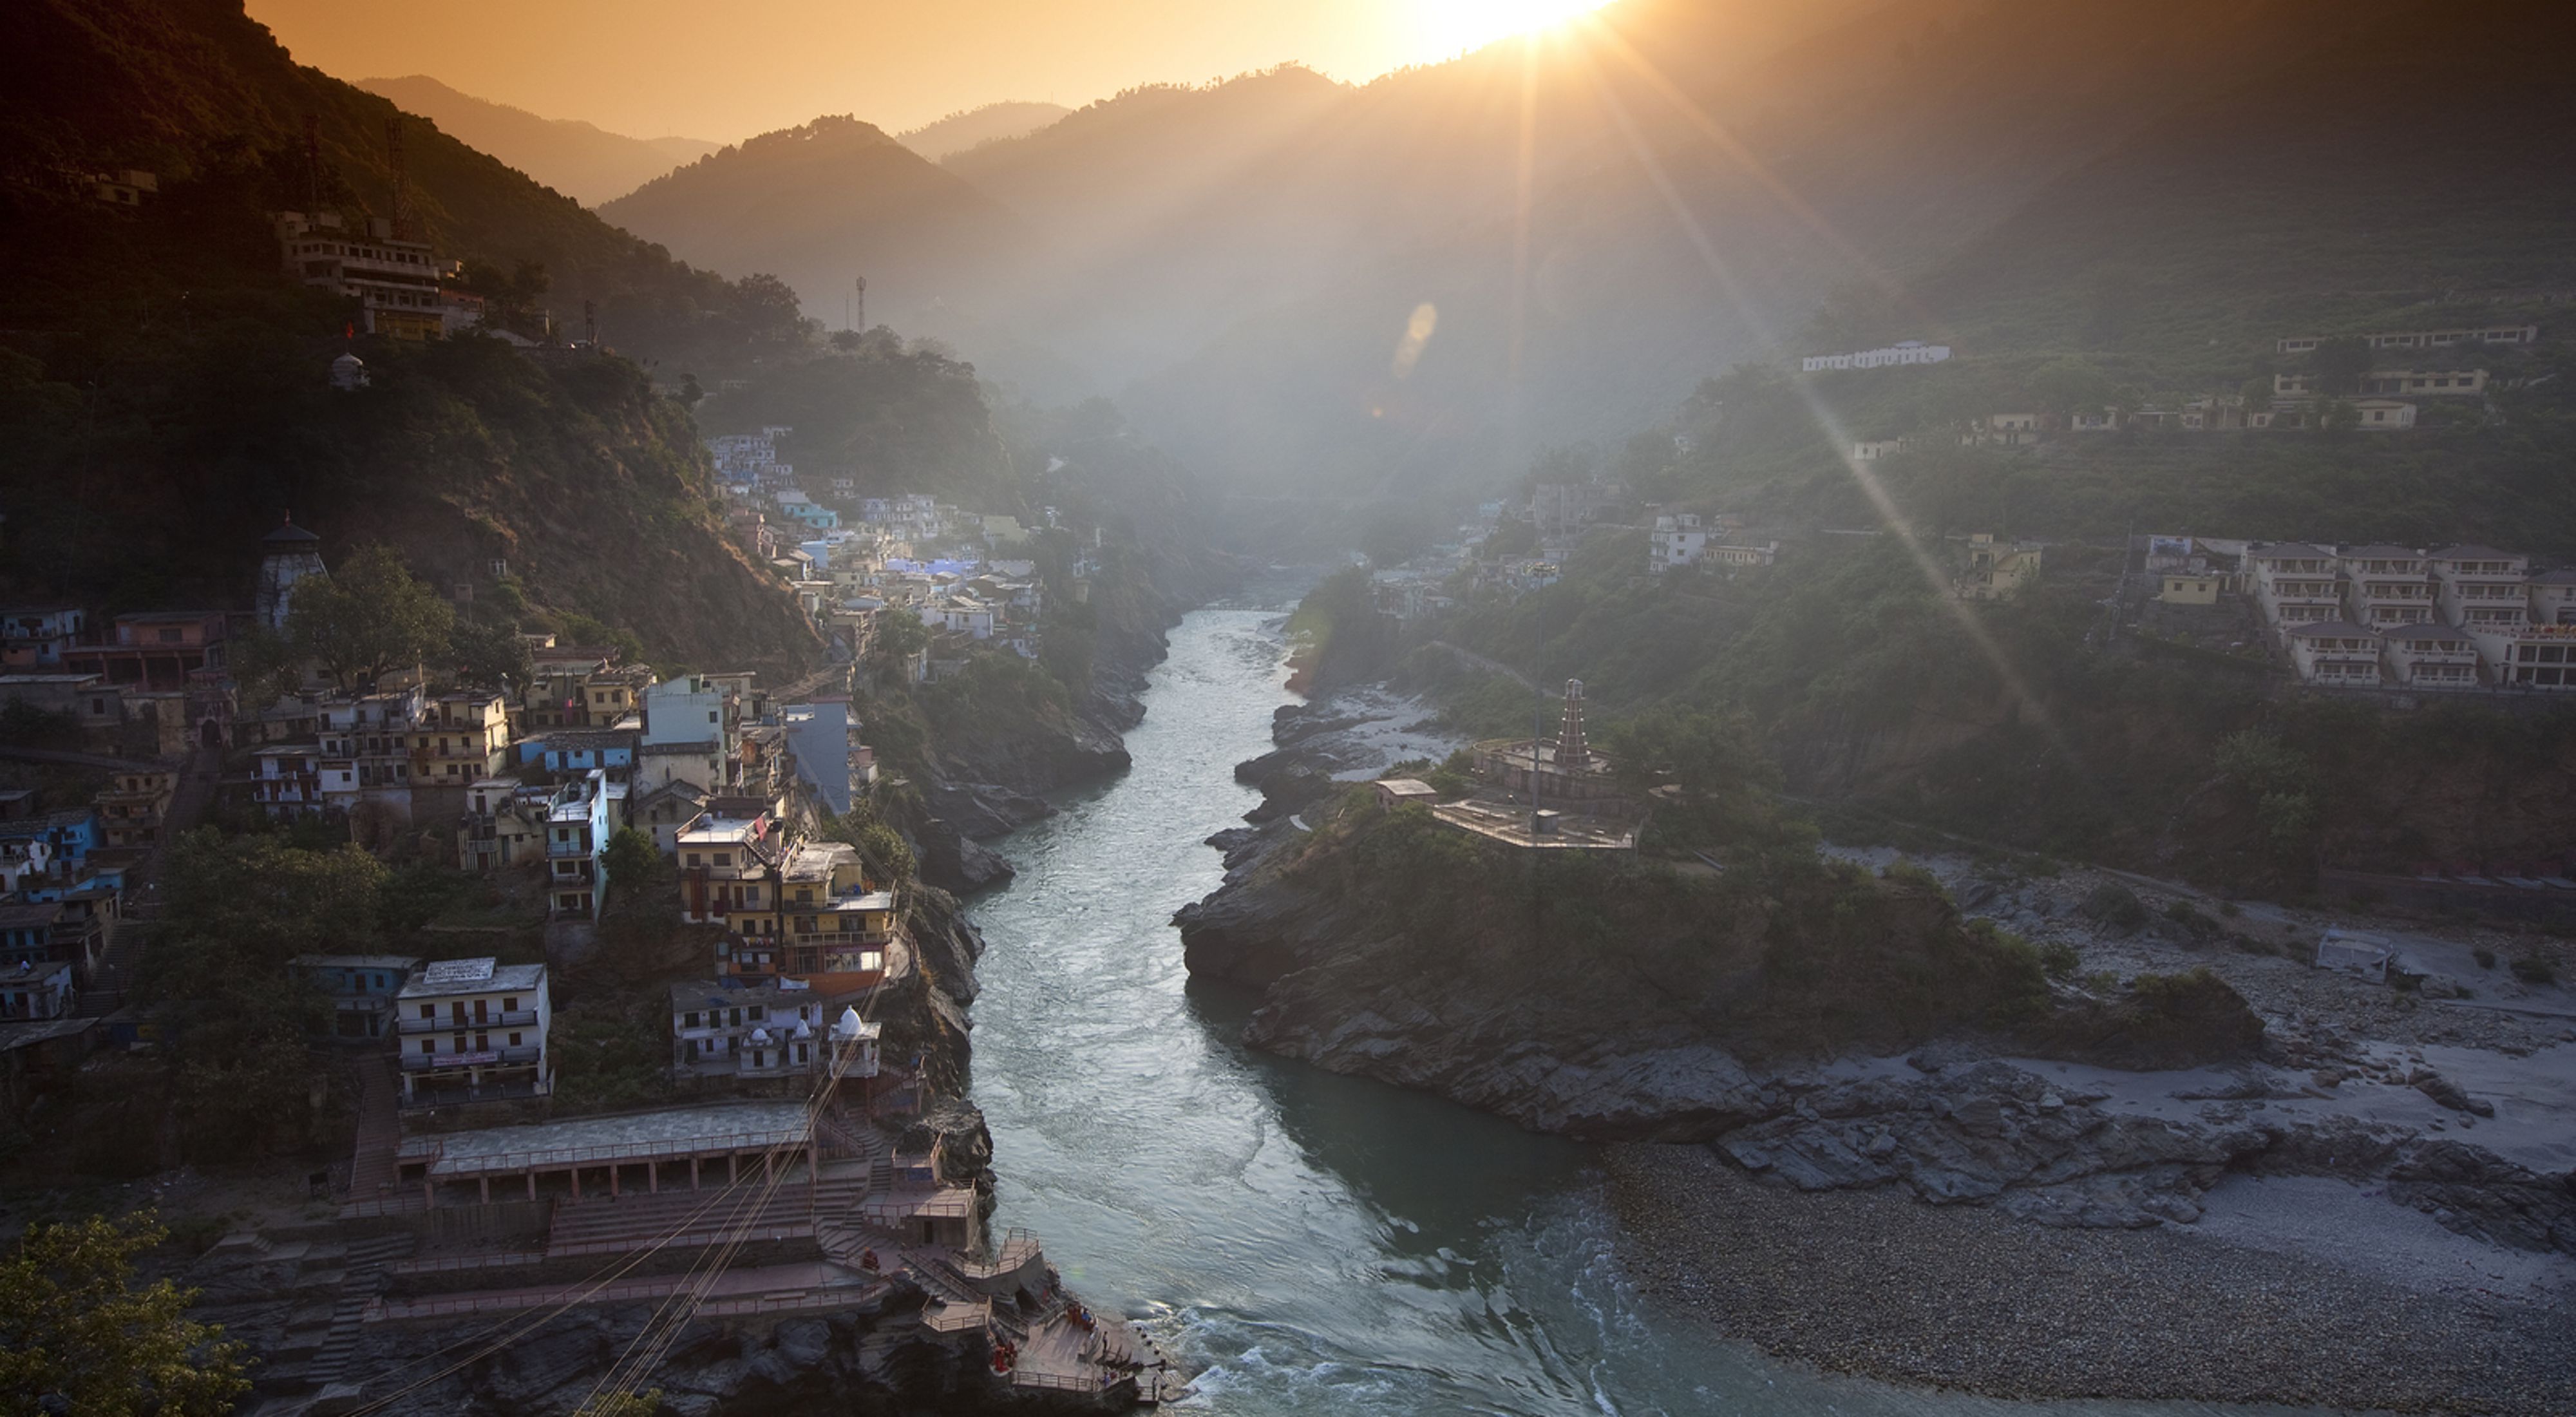 in Devprayag, India, where two other rivers, the Bhagirathi and Alaknanda, converge